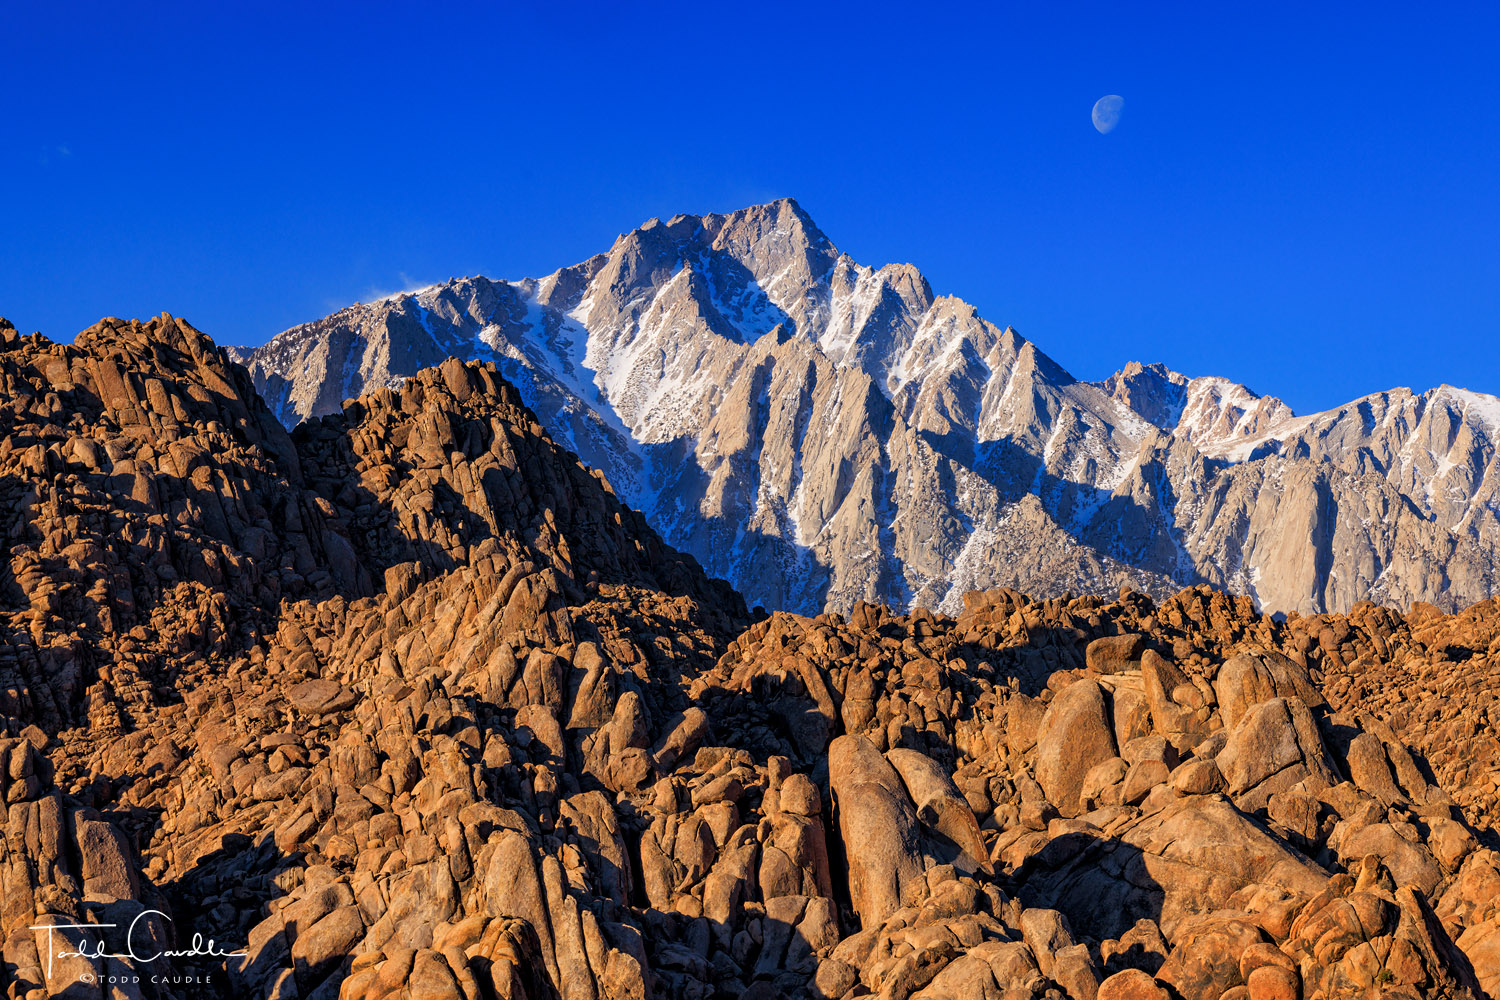 The moon sets over the shoulder of Lone Pine Peak in the Sierra Nevada Range.